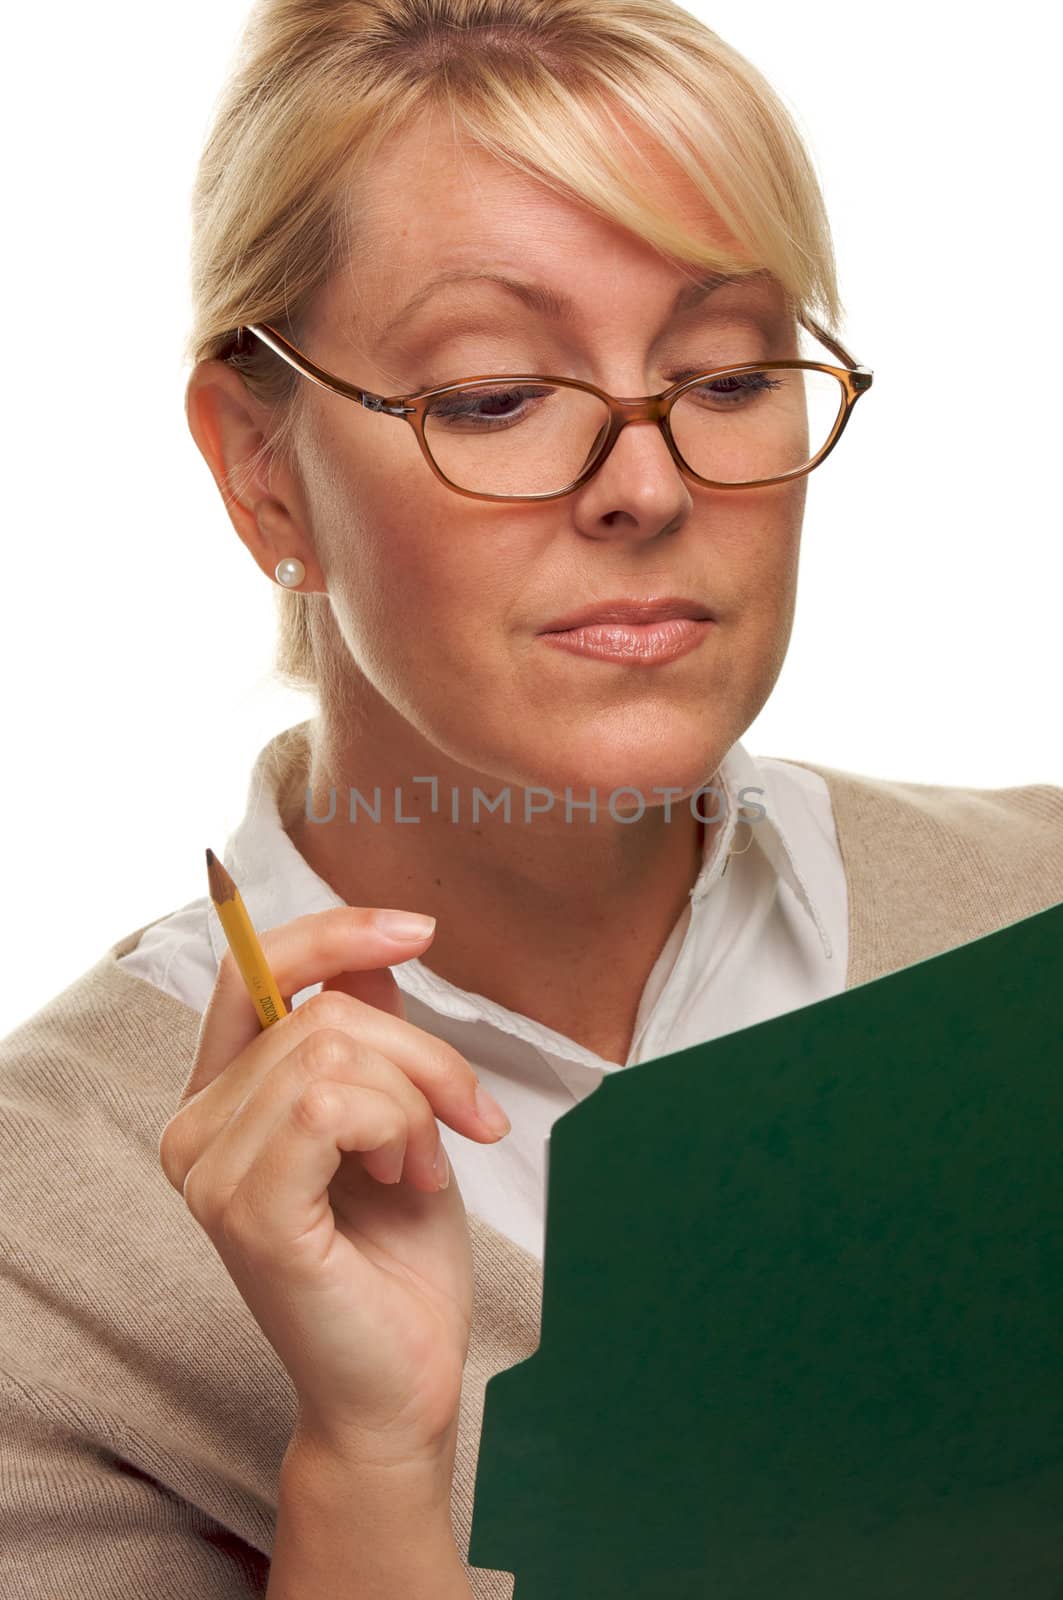 Beautiful Woman with Pencil and Folder taking notes.